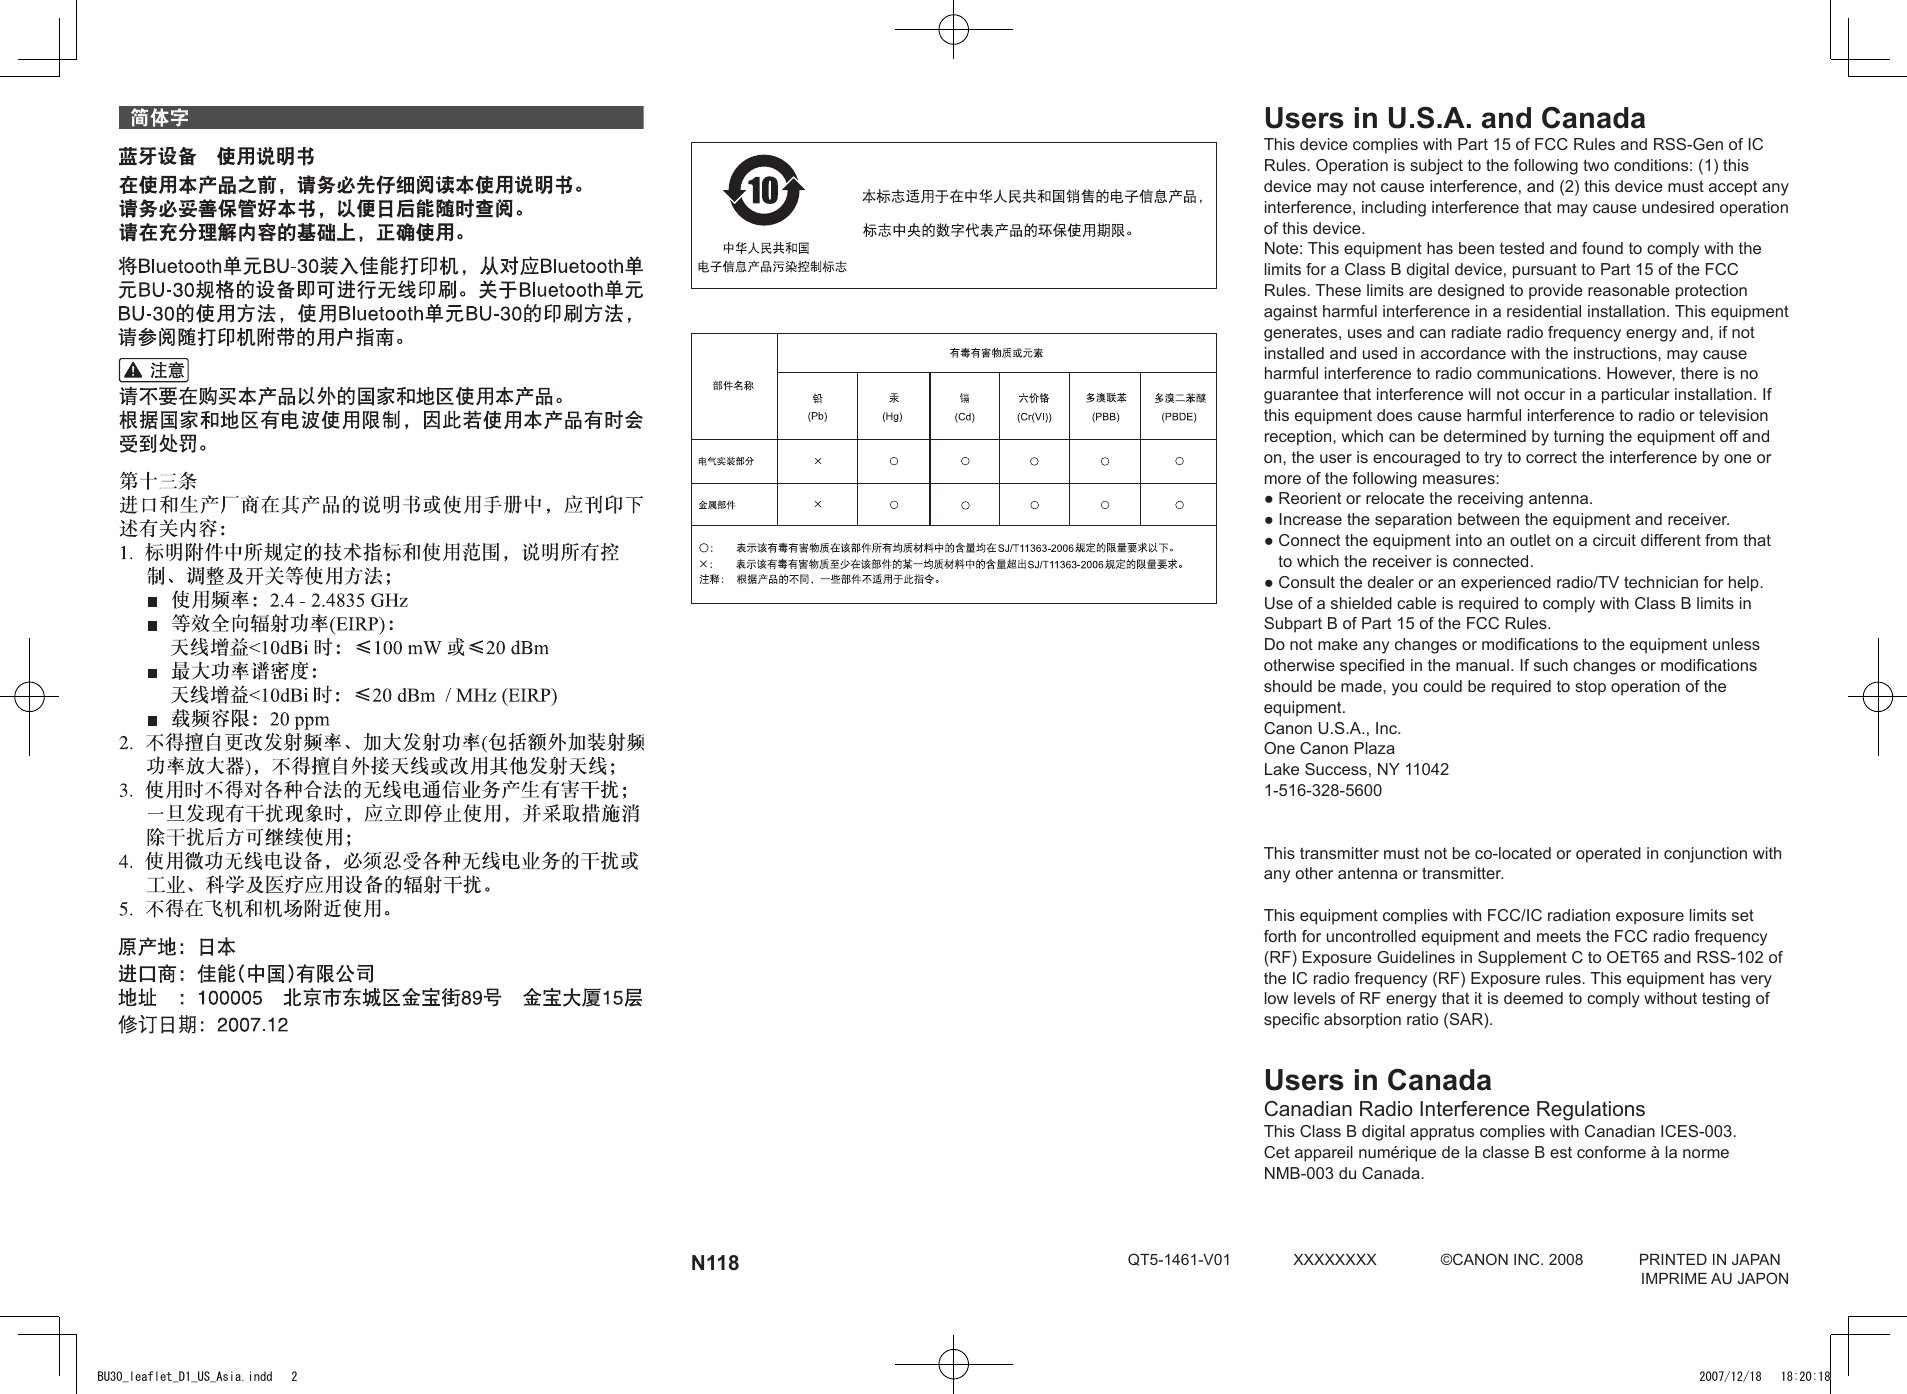 N118 QT5-1461-V01  XXXXXXXX  ©CANON INC. 2008  PRINTED IN JAPAN      IMPRIME AU JAPONUsers in U.S.A. and CanadaThis device complies with Part 15 of FCC Rules and RSS-Gen of IC Rules. Operation is subject to the following two conditions: (1) this device may not cause interference, and (2) this device must accept any interference, including interference that may cause undesired operation of this device.Note: This equipment has been tested and found to comply with the limits for a Class B digital device, pursuant to Part 15 of the FCC Rules. These limits are designed to provide reasonable protection against harmful interference in a residential installation. This equipment generates, uses and can radiate radio frequency energy and, if not installed and used in accordance with the instructions, may cause harmful interference to radio communications. However, there is no guarantee that interference will not occur in a particular installation. If this equipment does cause harmful interference to radio or television reception, which can be determined by turning the equipment off and on, the user is encouraged to try to correct the interference by one or more of the following measures:●  Reorient or relocate the receiving antenna.●  Increase the separation between the equipment and receiver.●  Connect the equipment into an outlet on a circuit different from that to which the receiver is connected.●  Consult the dealer or an experienced radio/TV technician for help.Use of a shielded cable is required to comply with Class B limits in Subpart B of Part 15 of the FCC Rules.Do not make any changes or modifications to the equipment unless otherwise specified in the manual. If such changes or modifications should be made, you could be required to stop operation of the equipment.Canon U.S.A., Inc.One Canon PlazaLake Success, NY 110421-516-328-5600This transmitter must not be co-located or operated in conjunction with any other antenna or transmitter.This equipment complies with FCC/IC radiation exposure limits set forth for uncontrolled equipment and meets the FCC radio frequency (RF) Exposure Guidelines in Supplement C to OET65 and RSS-102 of the IC radio frequency (RF) Exposure rules. This equipment has very low levels of RF energy that it is deemed to comply without testing of specific absorption ratio (SAR).Users in CanadaCanadian Radio Interference RegulationsThis Class B digital appratus complies with Canadian ICES-003.Cet appareil numérique de la classe B est conforme à la norme NMB-003 du Canada.BU30_leaflet_D1_US_Asia.indd   2 2007/12/18   18:20:18